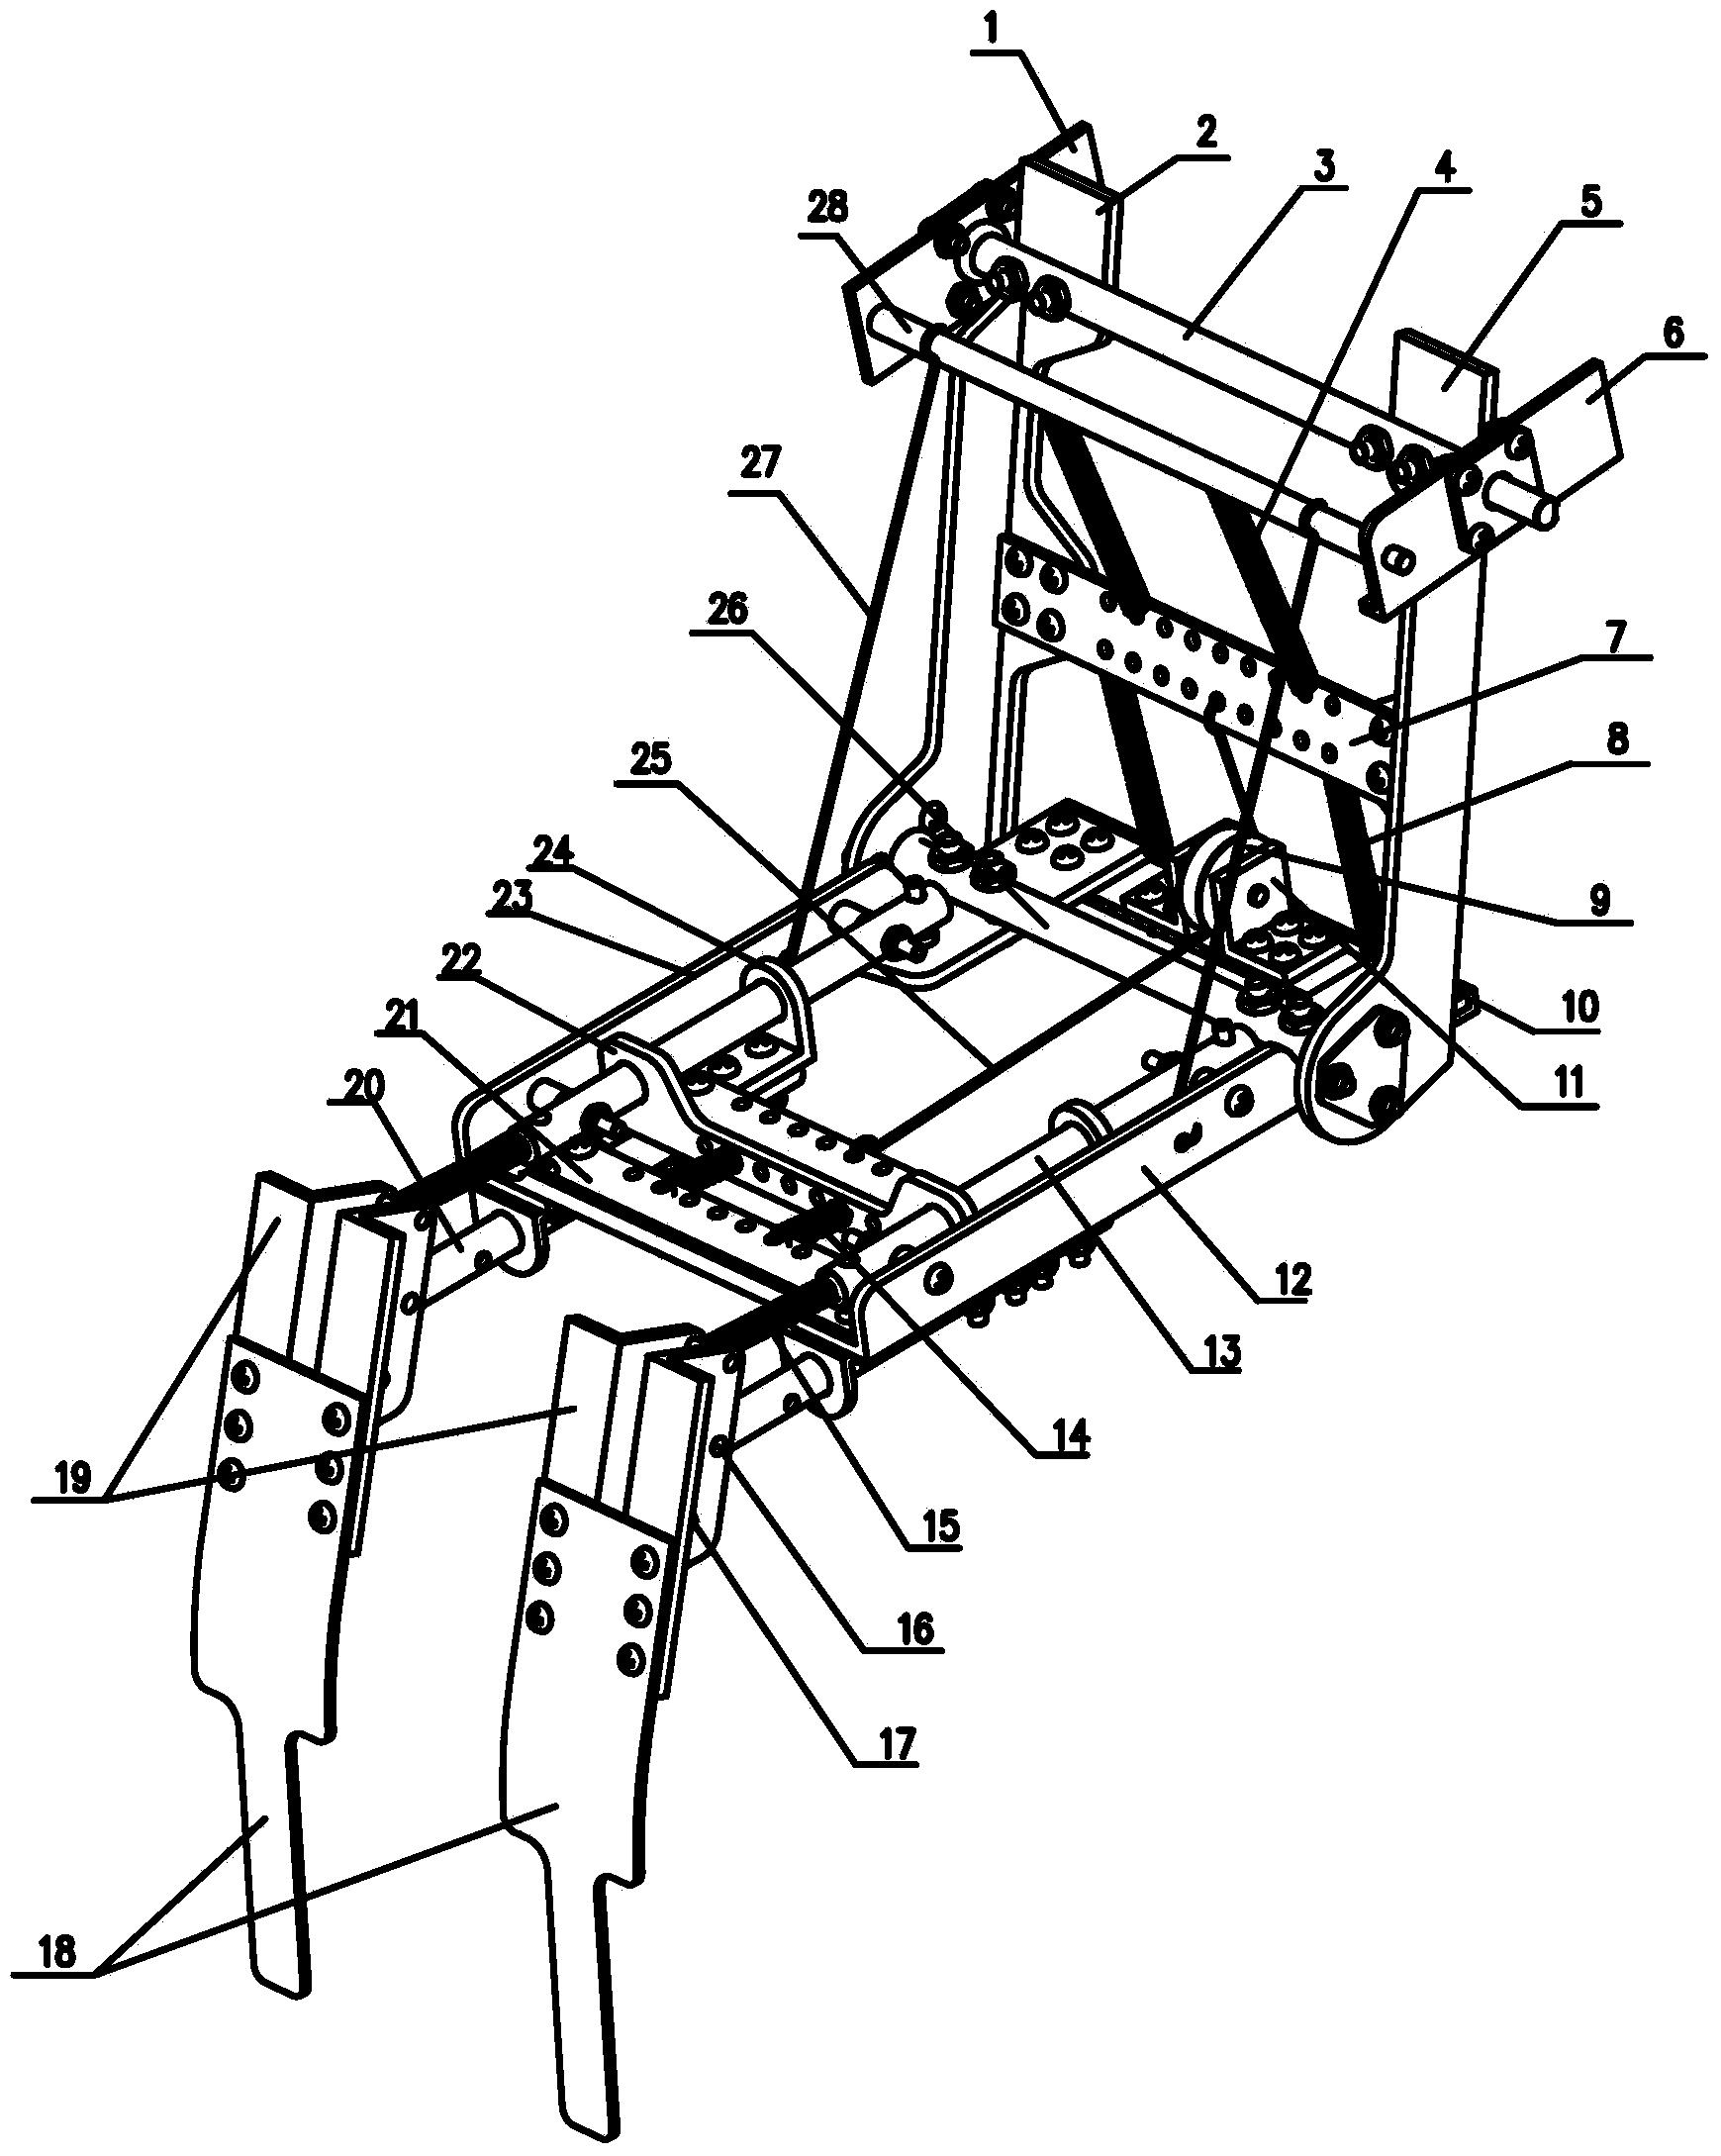 Mechanism for simulating jumping of frog rear legs